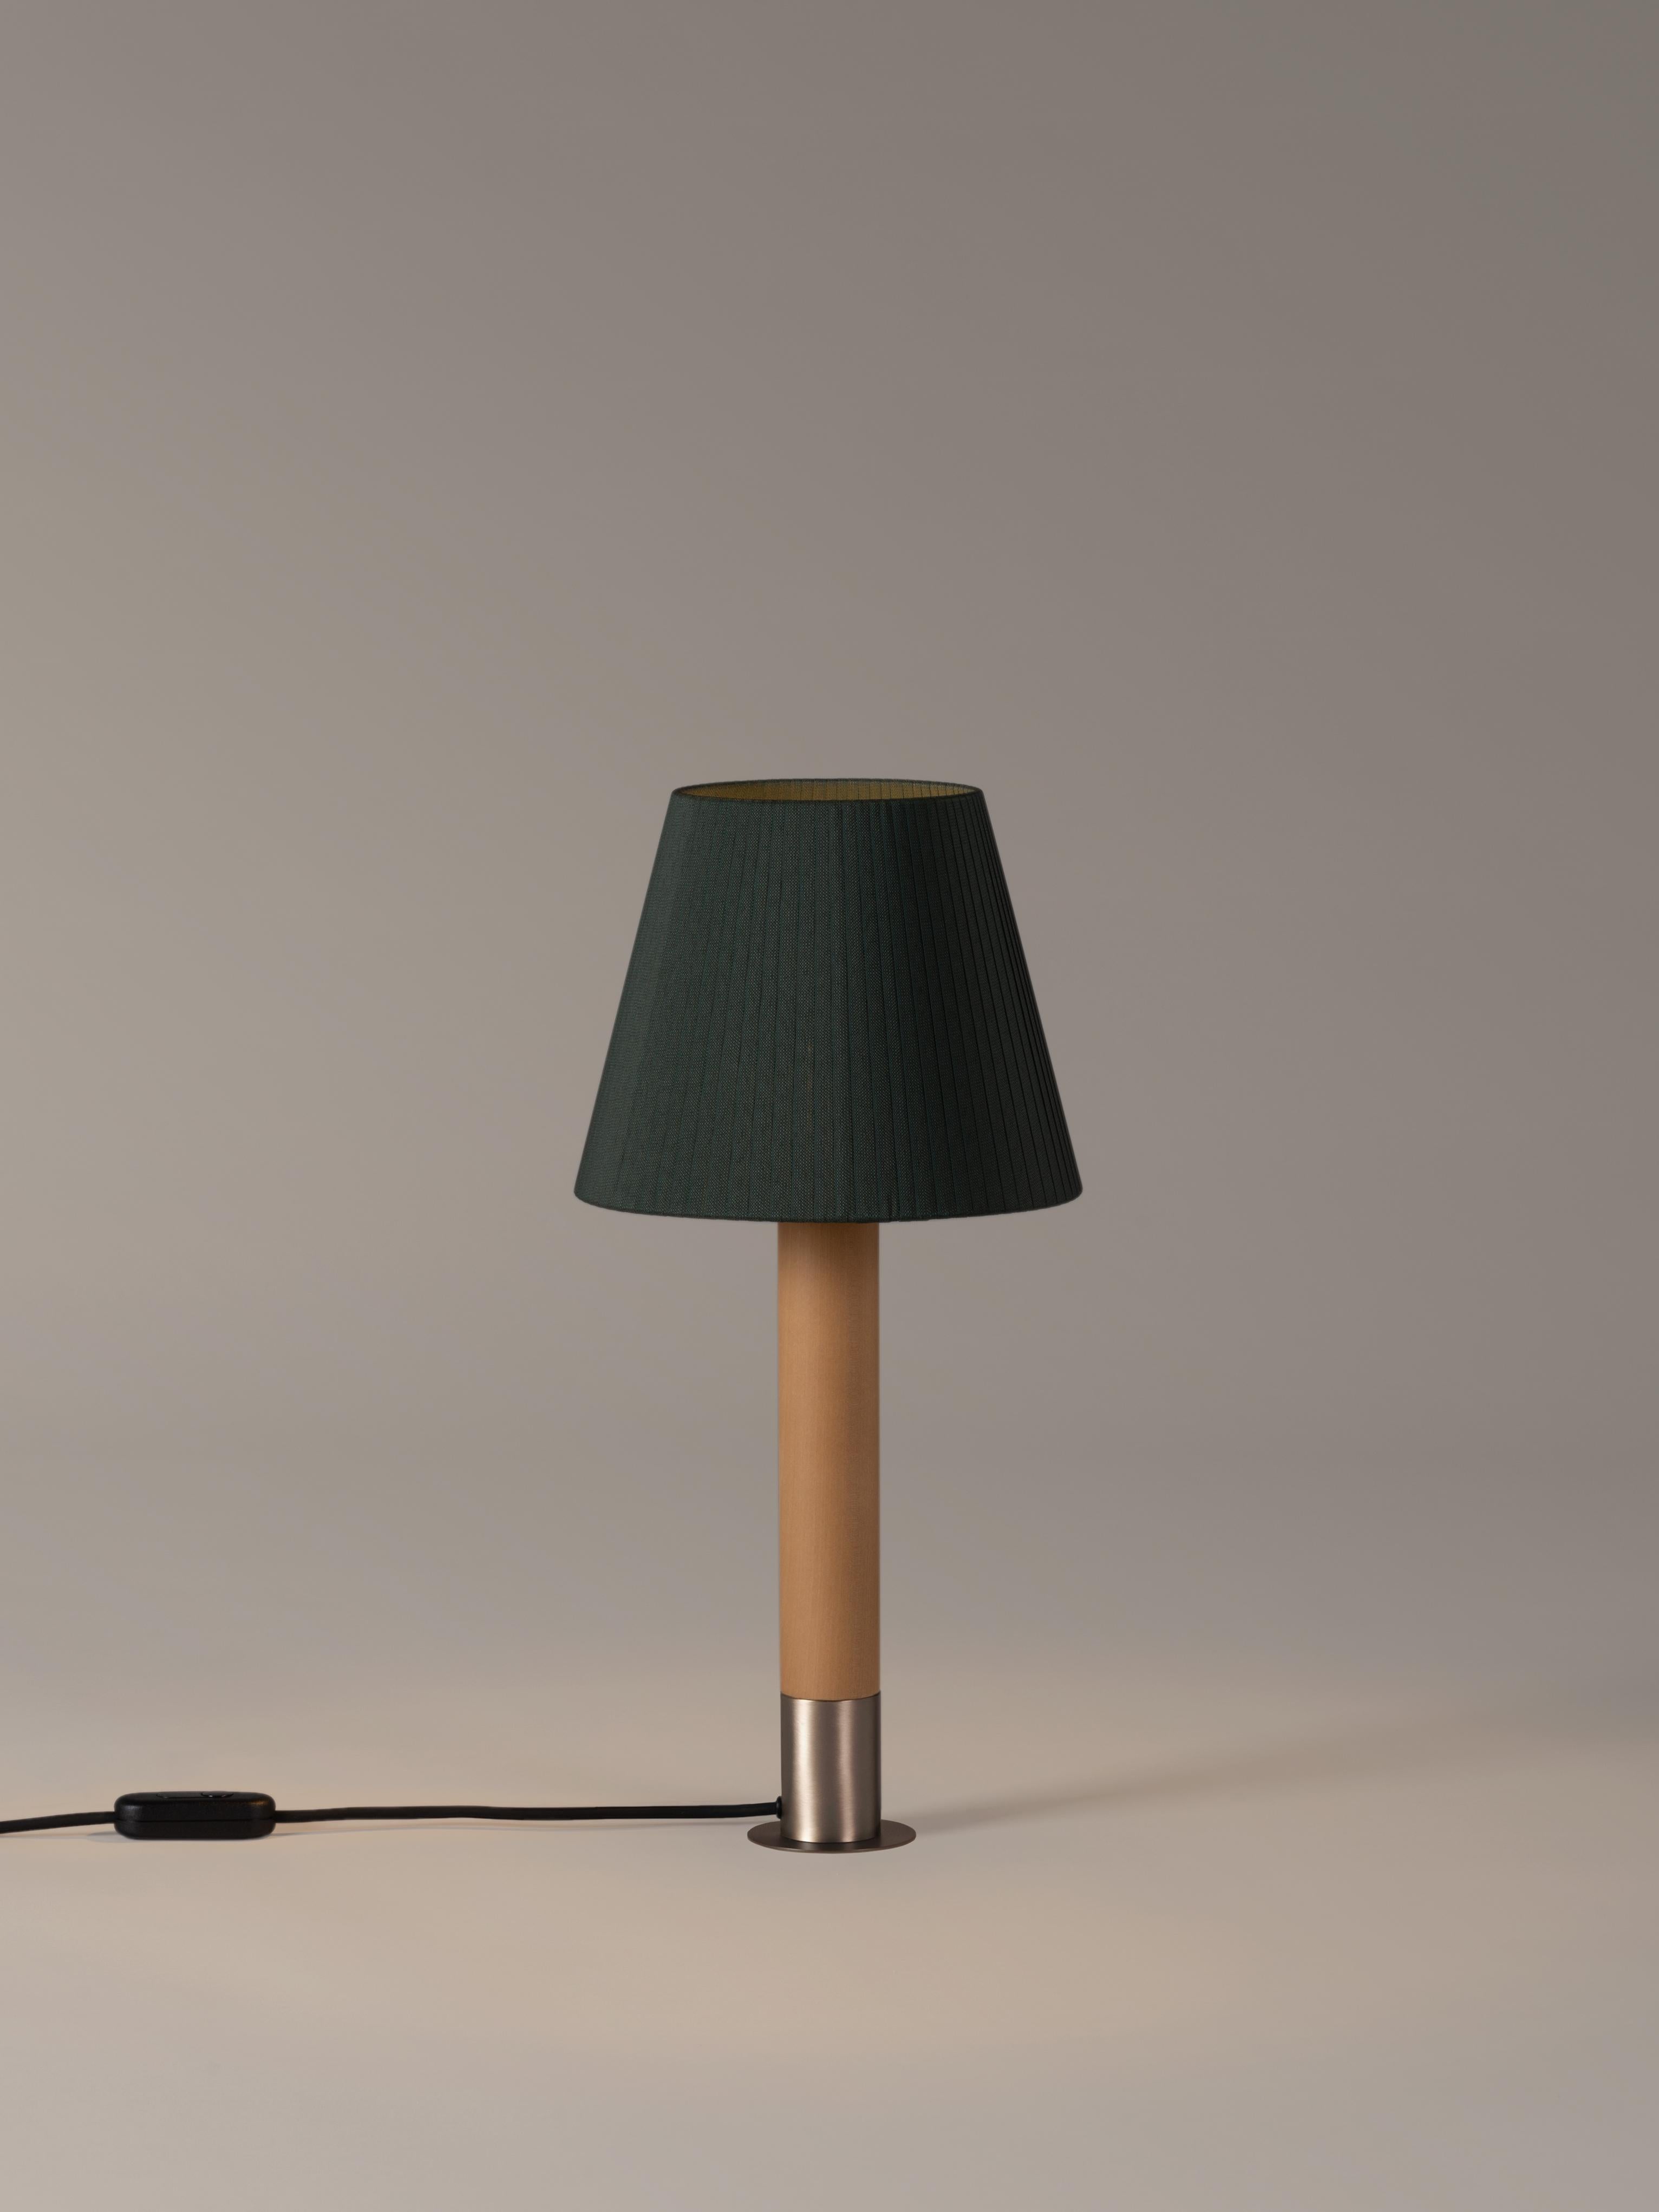 Nickel and green Básica M1 table lamp by Santiago Roqueta, Santa & Cole
Dimensions: D 25 x H 52 cm
Materials: Nickel, birch wood, ribbon.
Available in other shade colors and with or without the stabilizing disc.
Available in nickel or